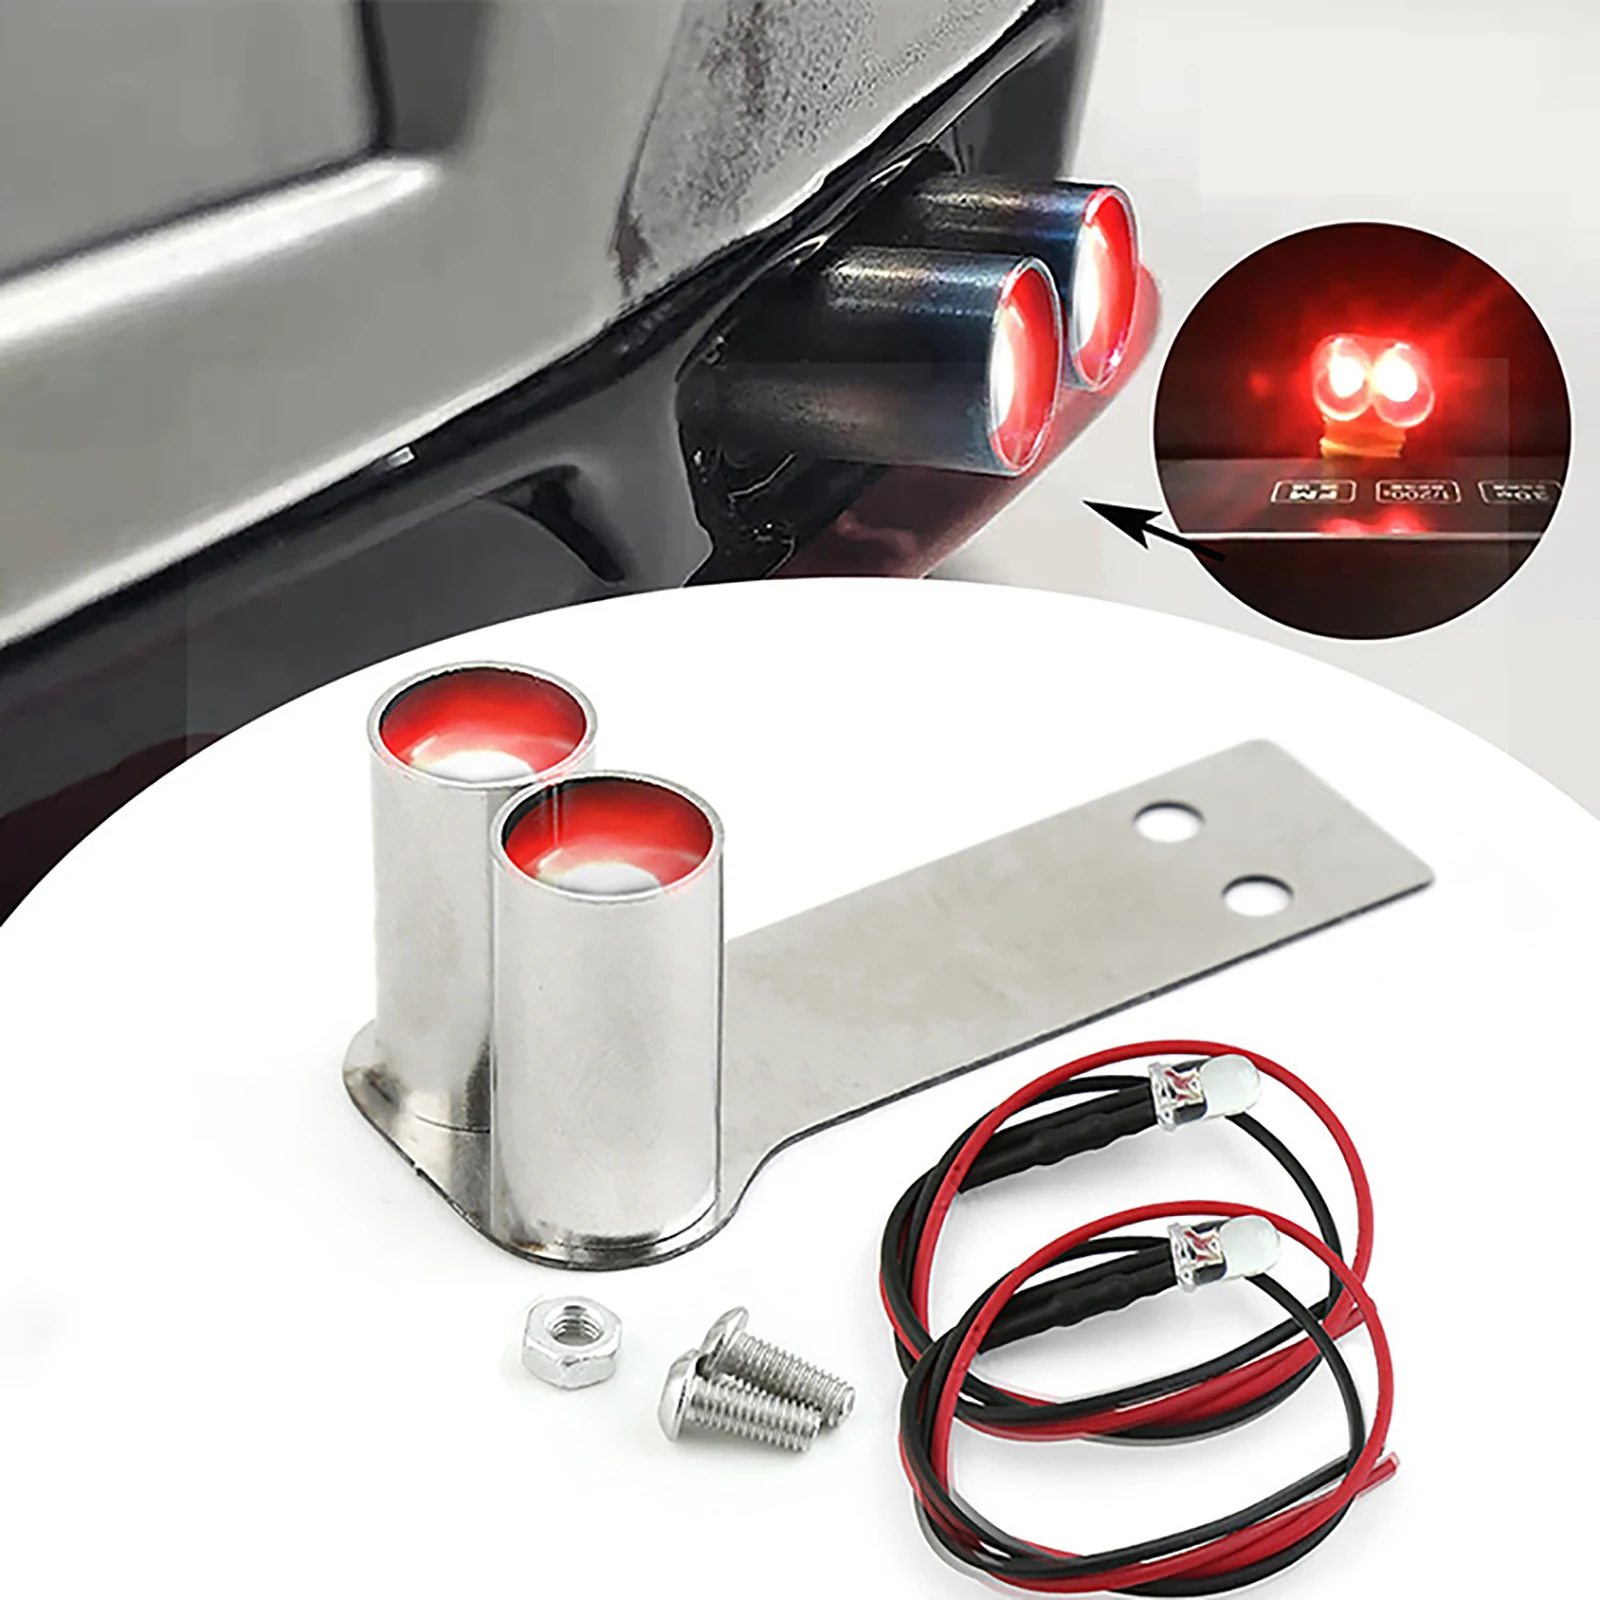 1PCS Stainless Steel RC Car Simulation Exhaust Pipe LED Modified Upgrade Part for 1/10 RC Drift Car Model Accessories